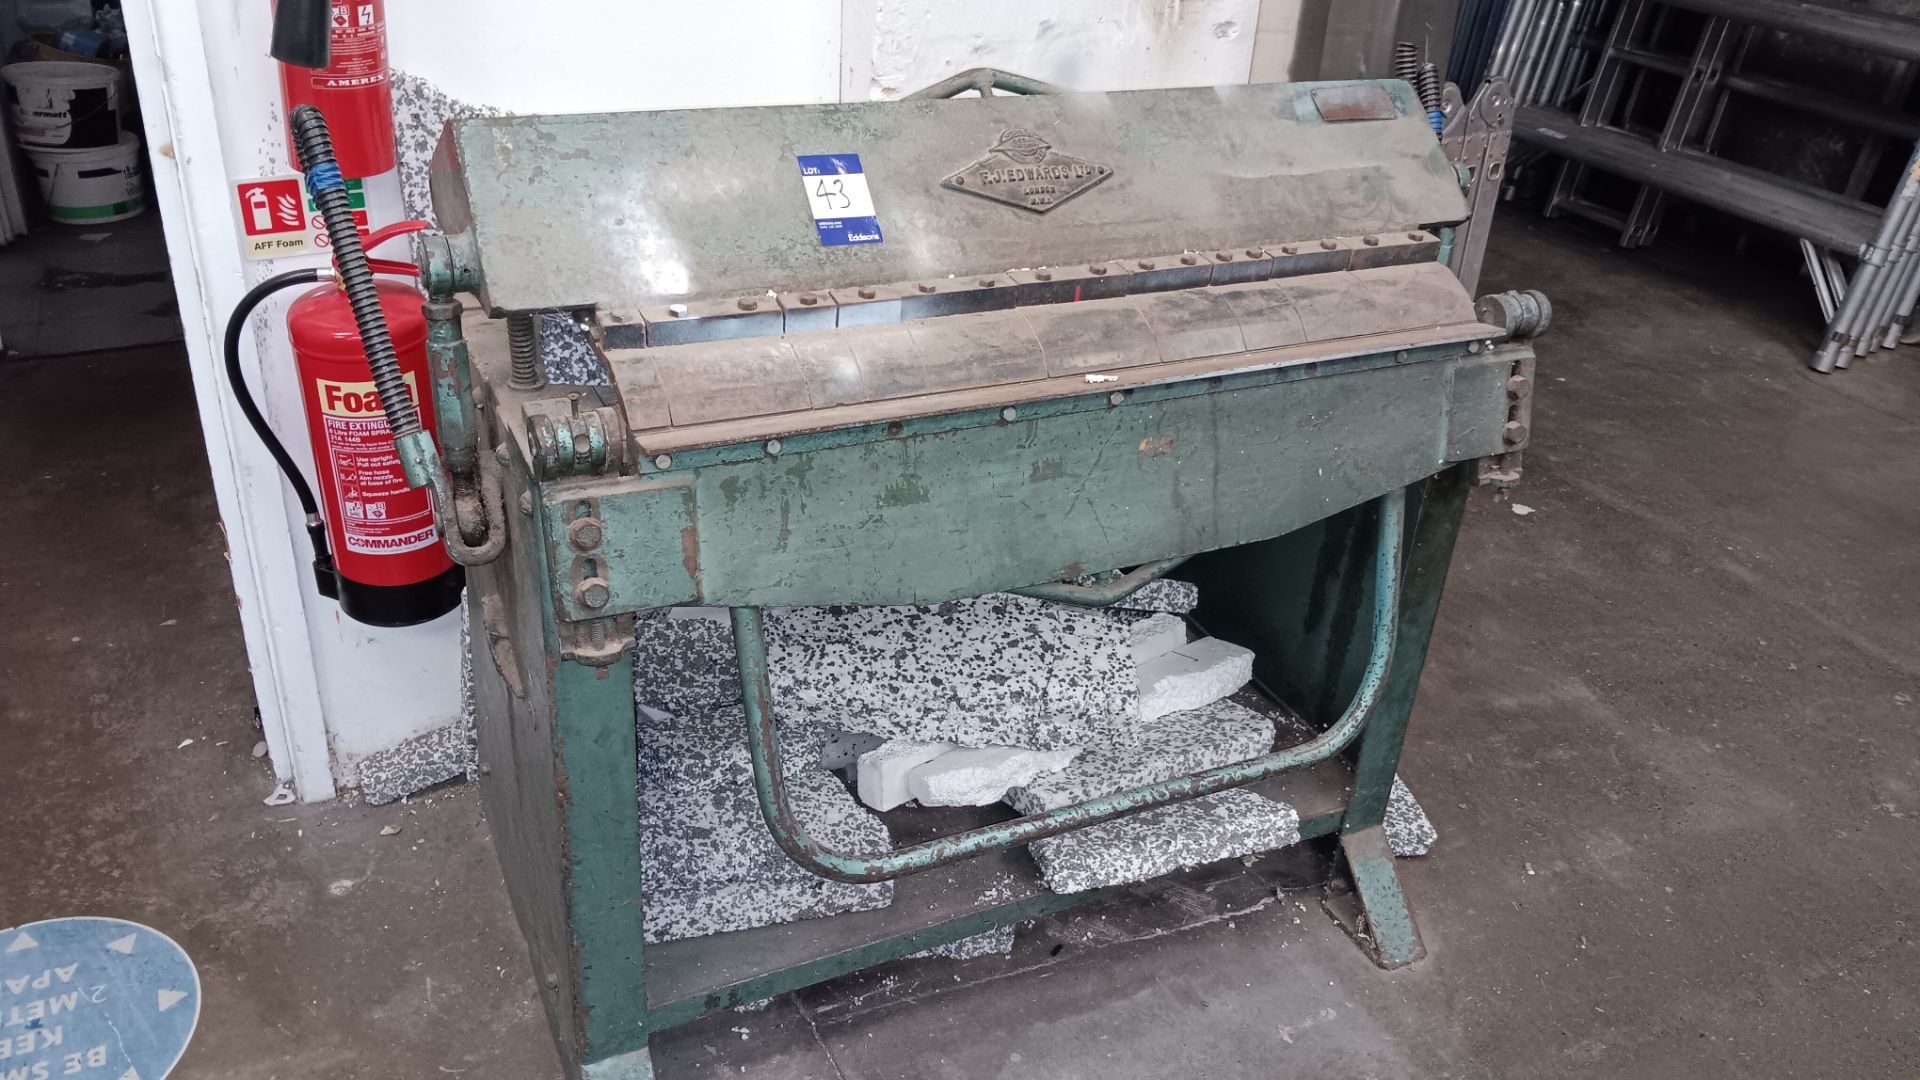 FJ Edwards 3 foot box and pan folder, serial number 05867 – Located in Unit 3